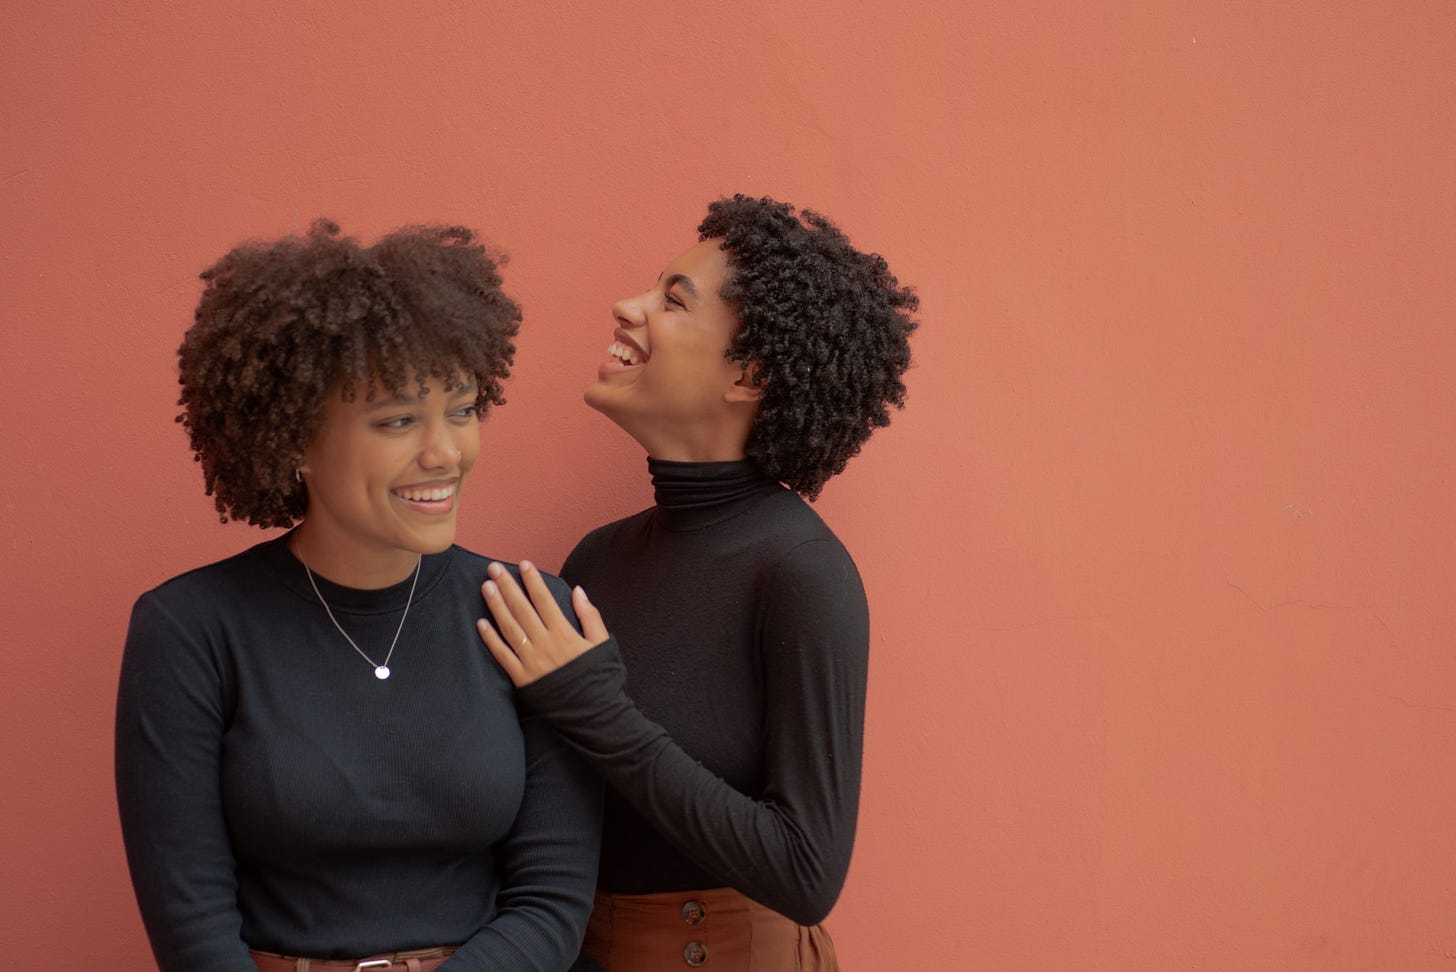 Two Black women smile and laugh together. They both wear black turtlenecks.